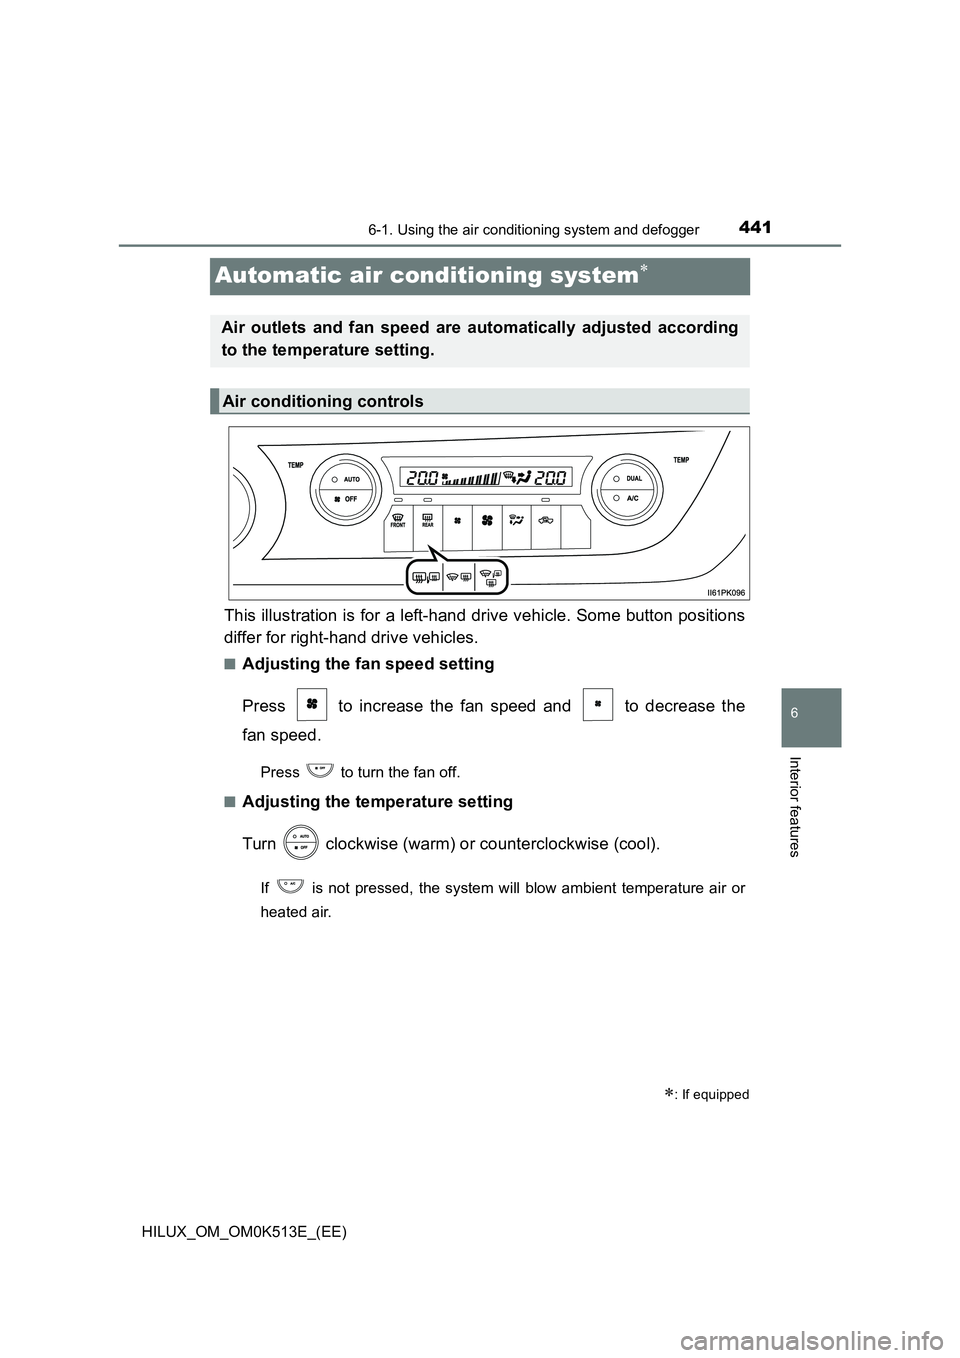 TOYOTA HILUX 2022  Owners Manual 4416-1. Using the air conditioning system and defogger
HILUX_OM_OM0K513E_(EE)
6
Interior features
Automatic air conditioning system
This illustration is for a left-hand drive vehicle. Some button p